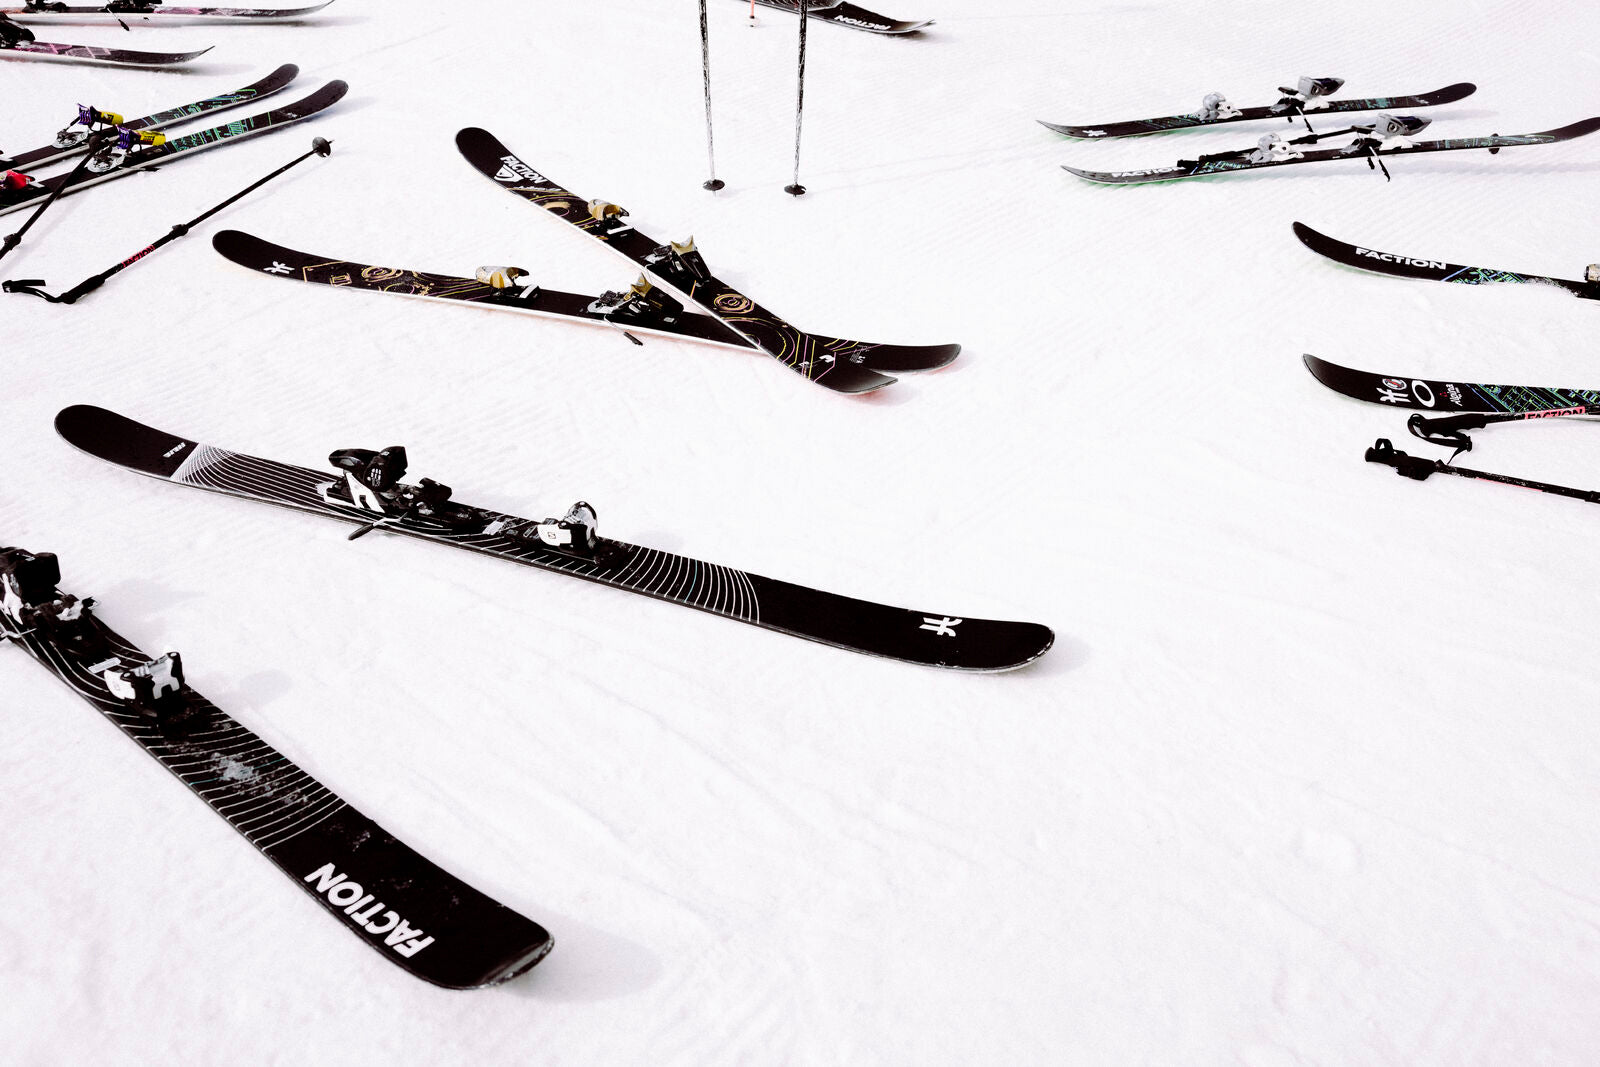 a bunch of skis ambiently laying on the snow